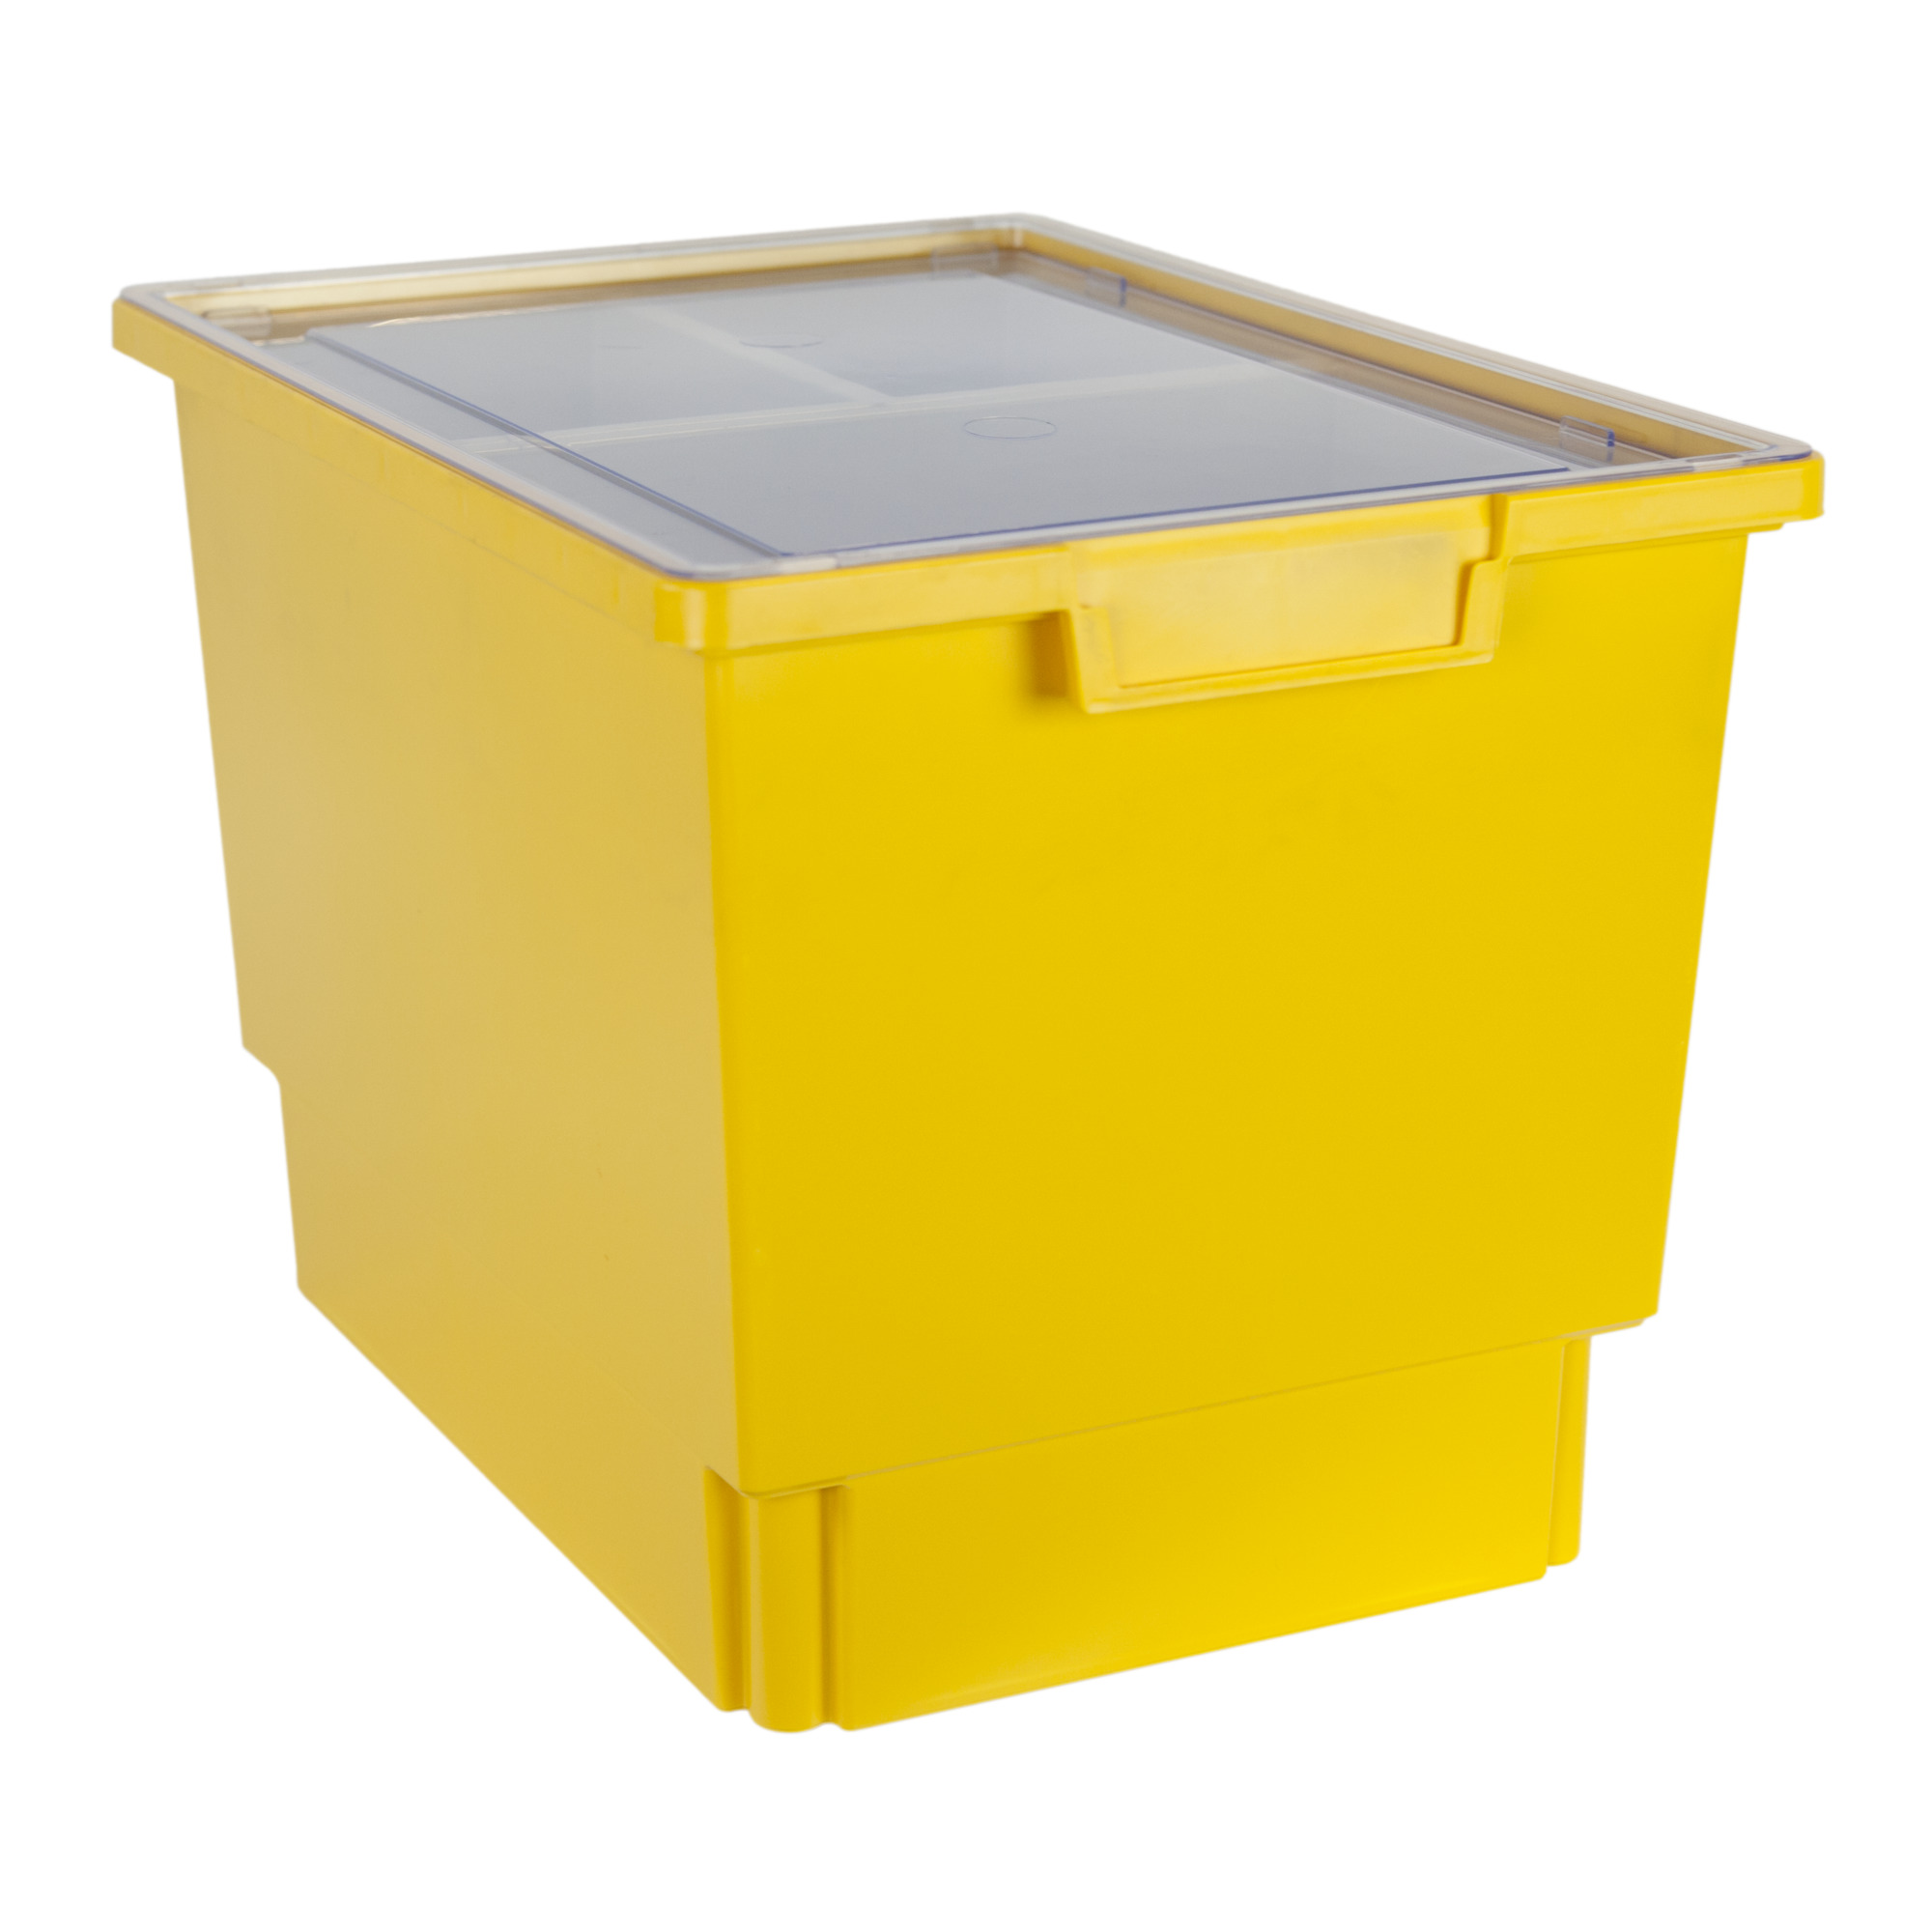 StorWerks, Slim Line 12Inch Tray Kit (3 x Inserts) Yellow-3PK, Included (qty.) 3, Material Plastic, Height 12 in, Model - Certwood CE1954PY-NK0004-3